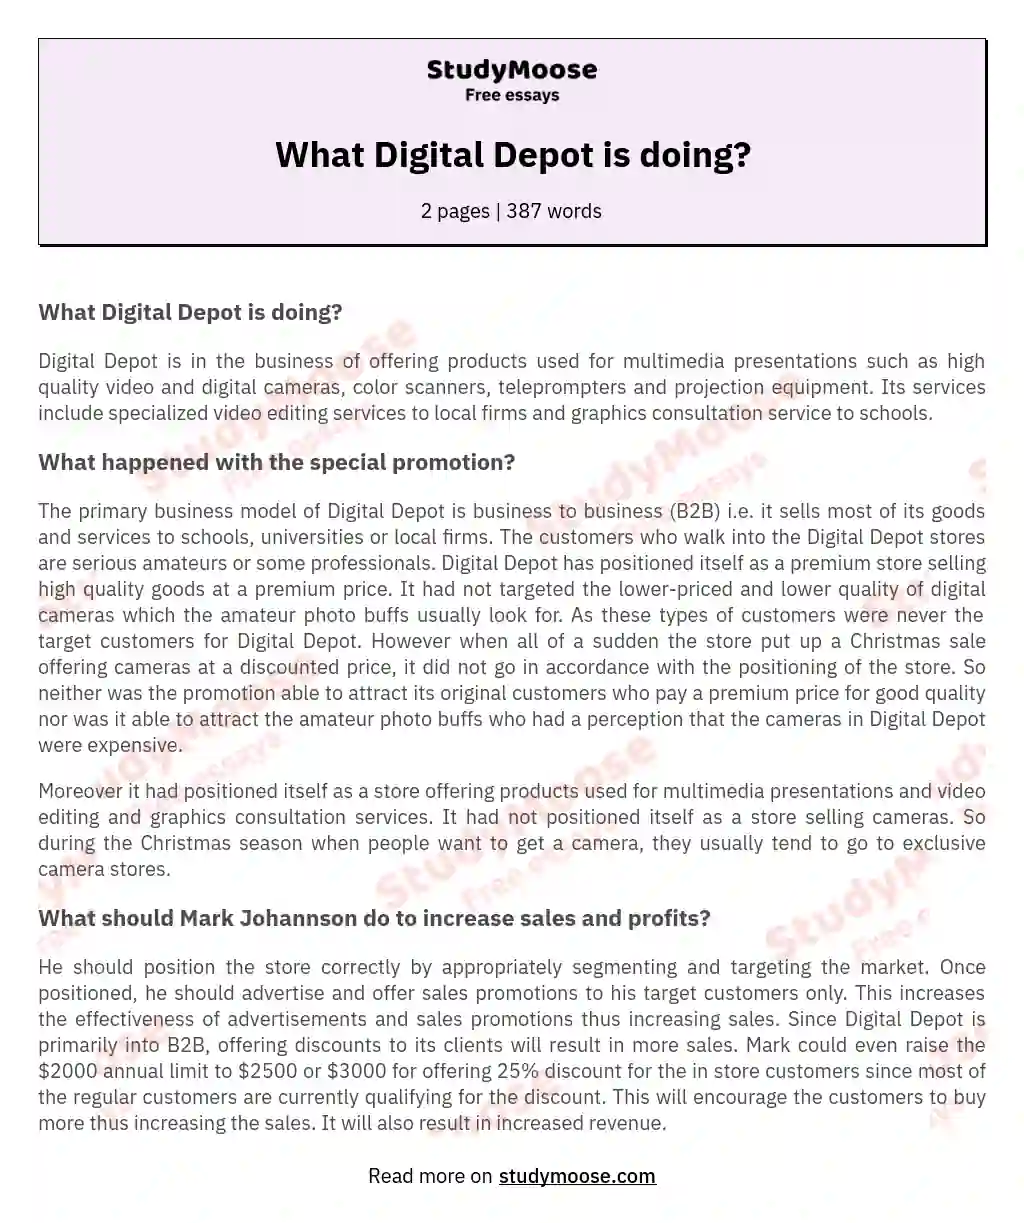 What Digital Depot is doing?